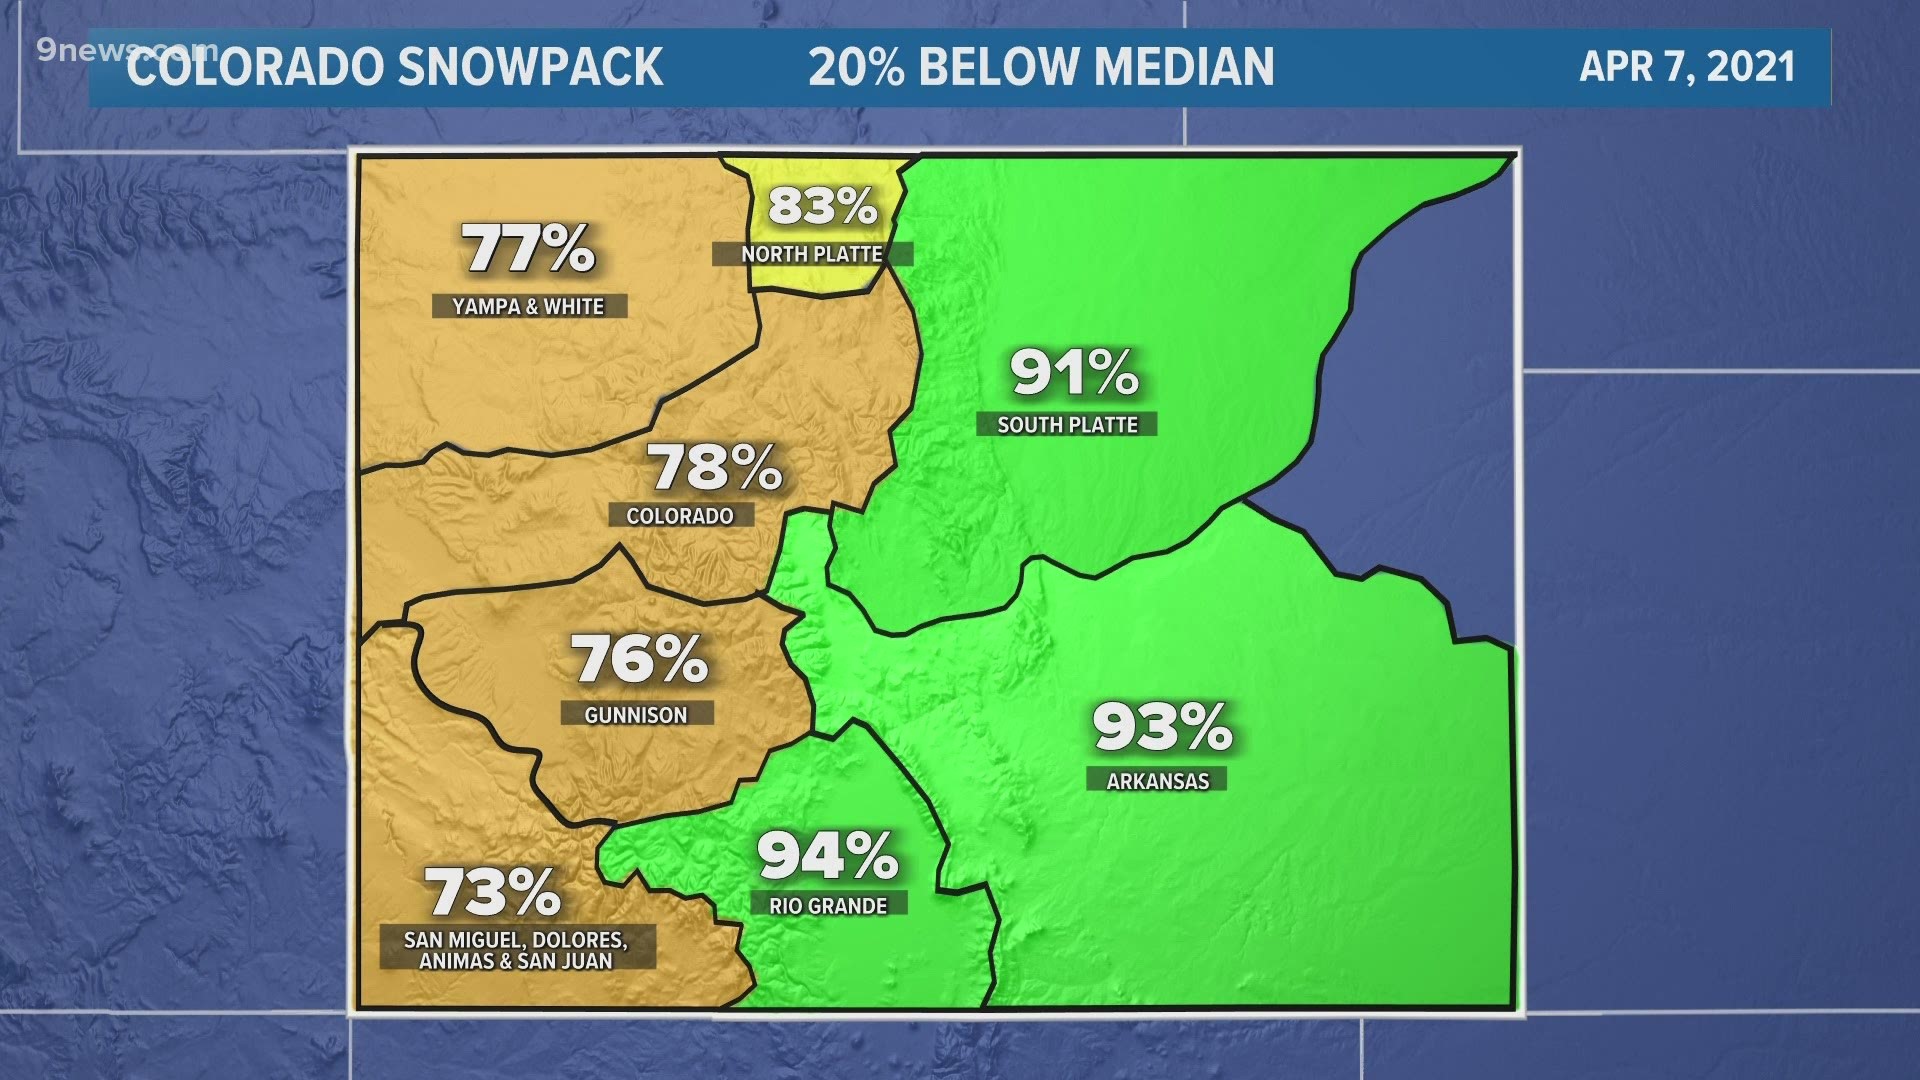 Snowpack may have peaked early this year.